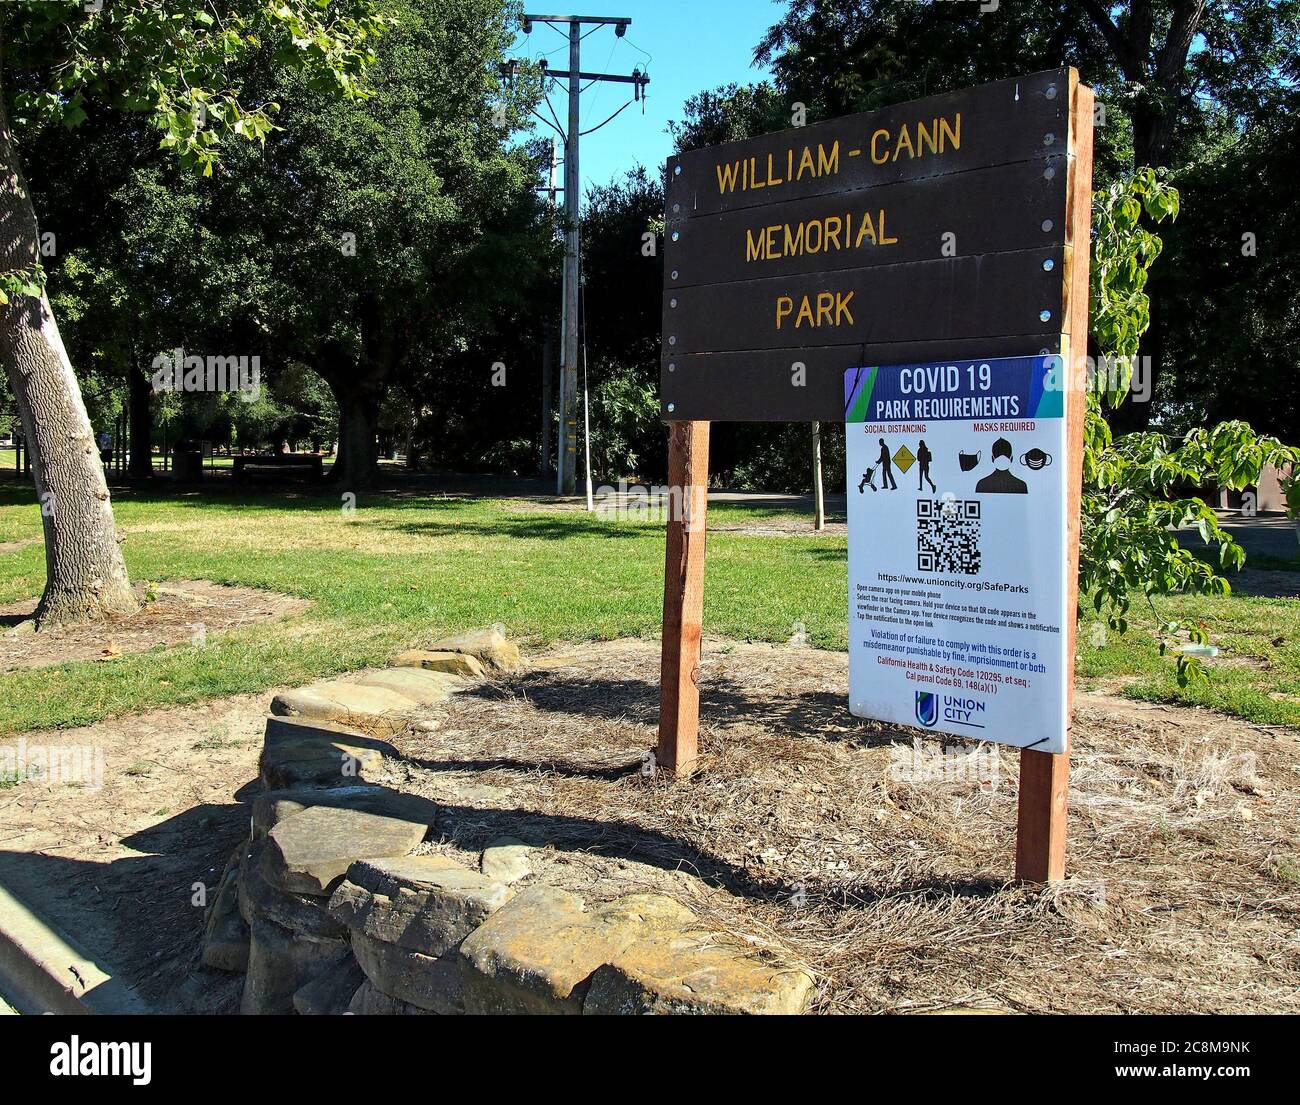 Covid 19 Park requirements sign at entrance to William  Cann Park in Union City, California Stock Photo